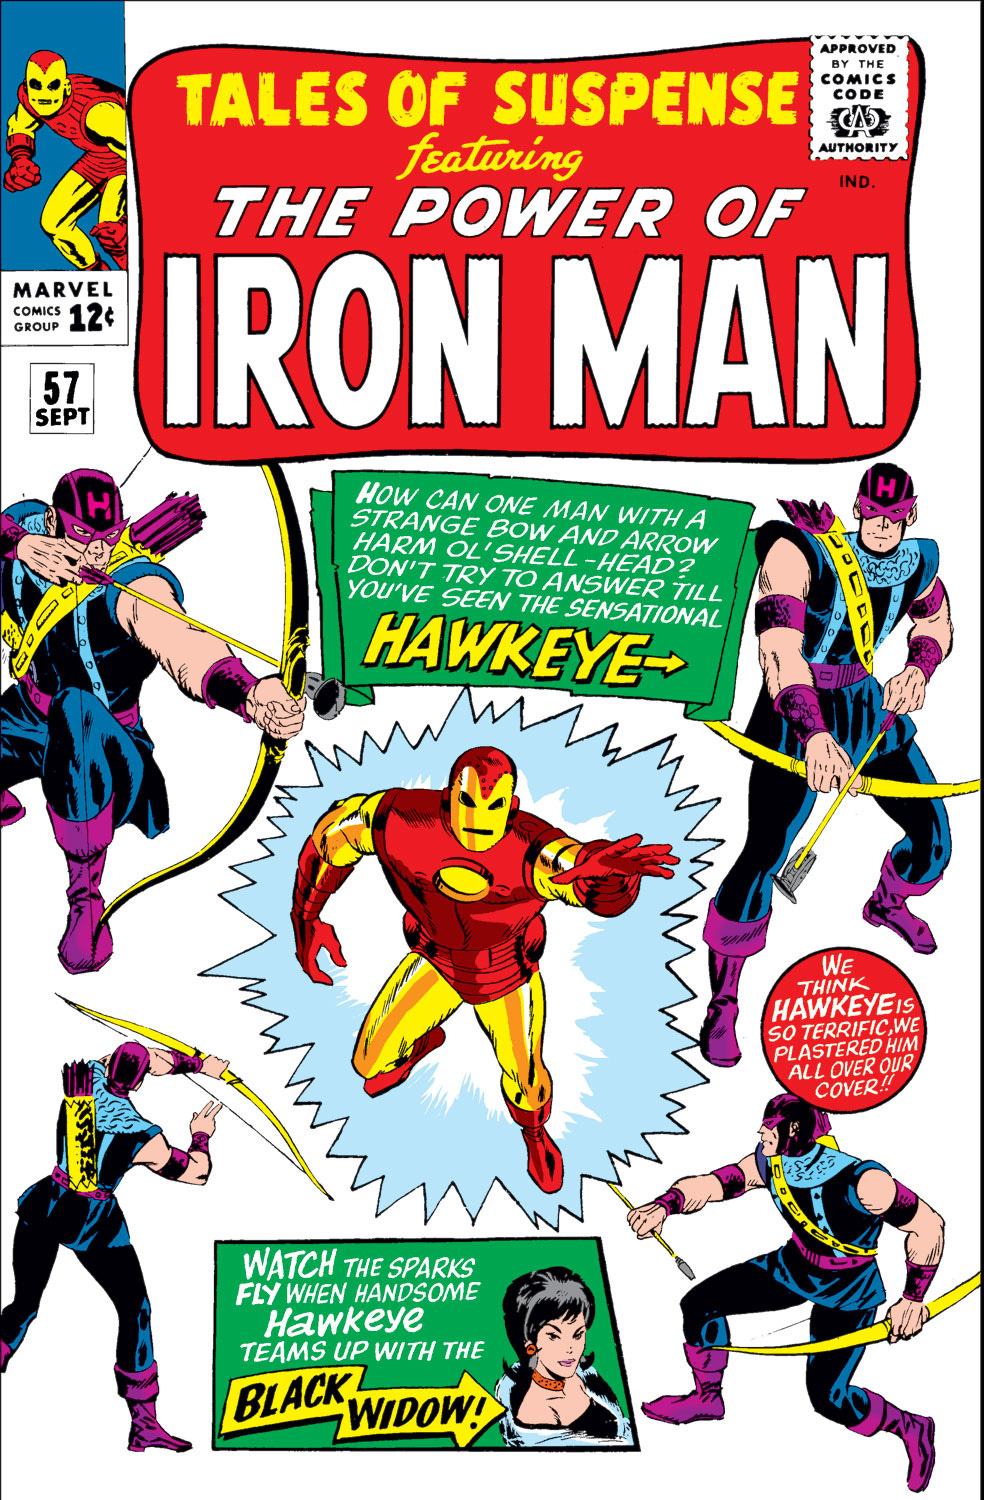 Tales of Suspense (1959) #57 | Comic Issues | Marvel